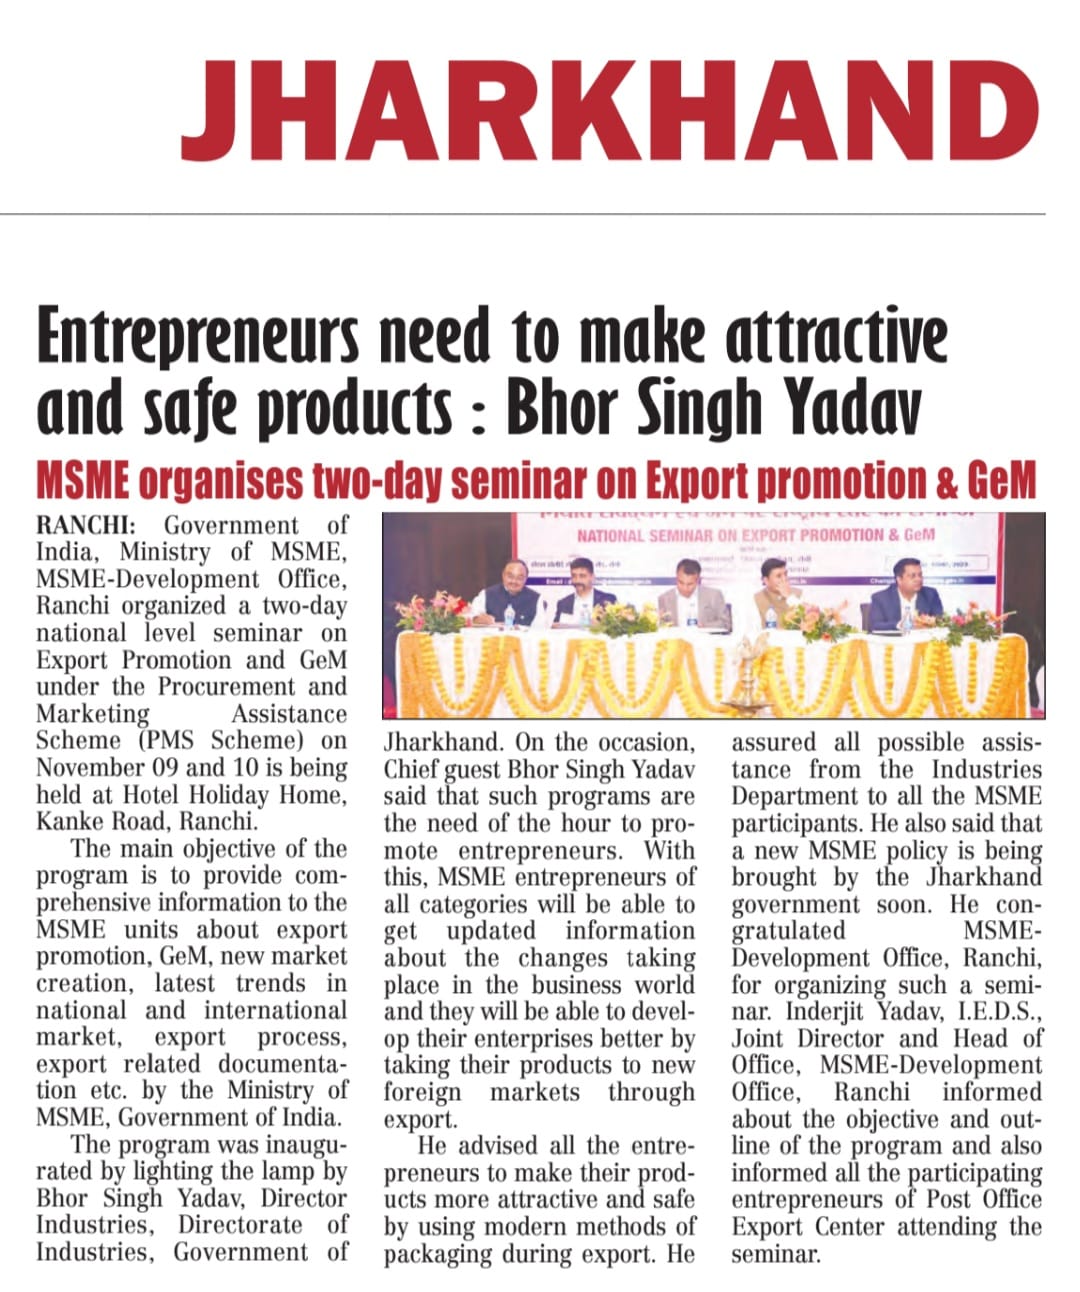 Entrepreneurs need to make attractive and safe products: Bhor Singh Yadav